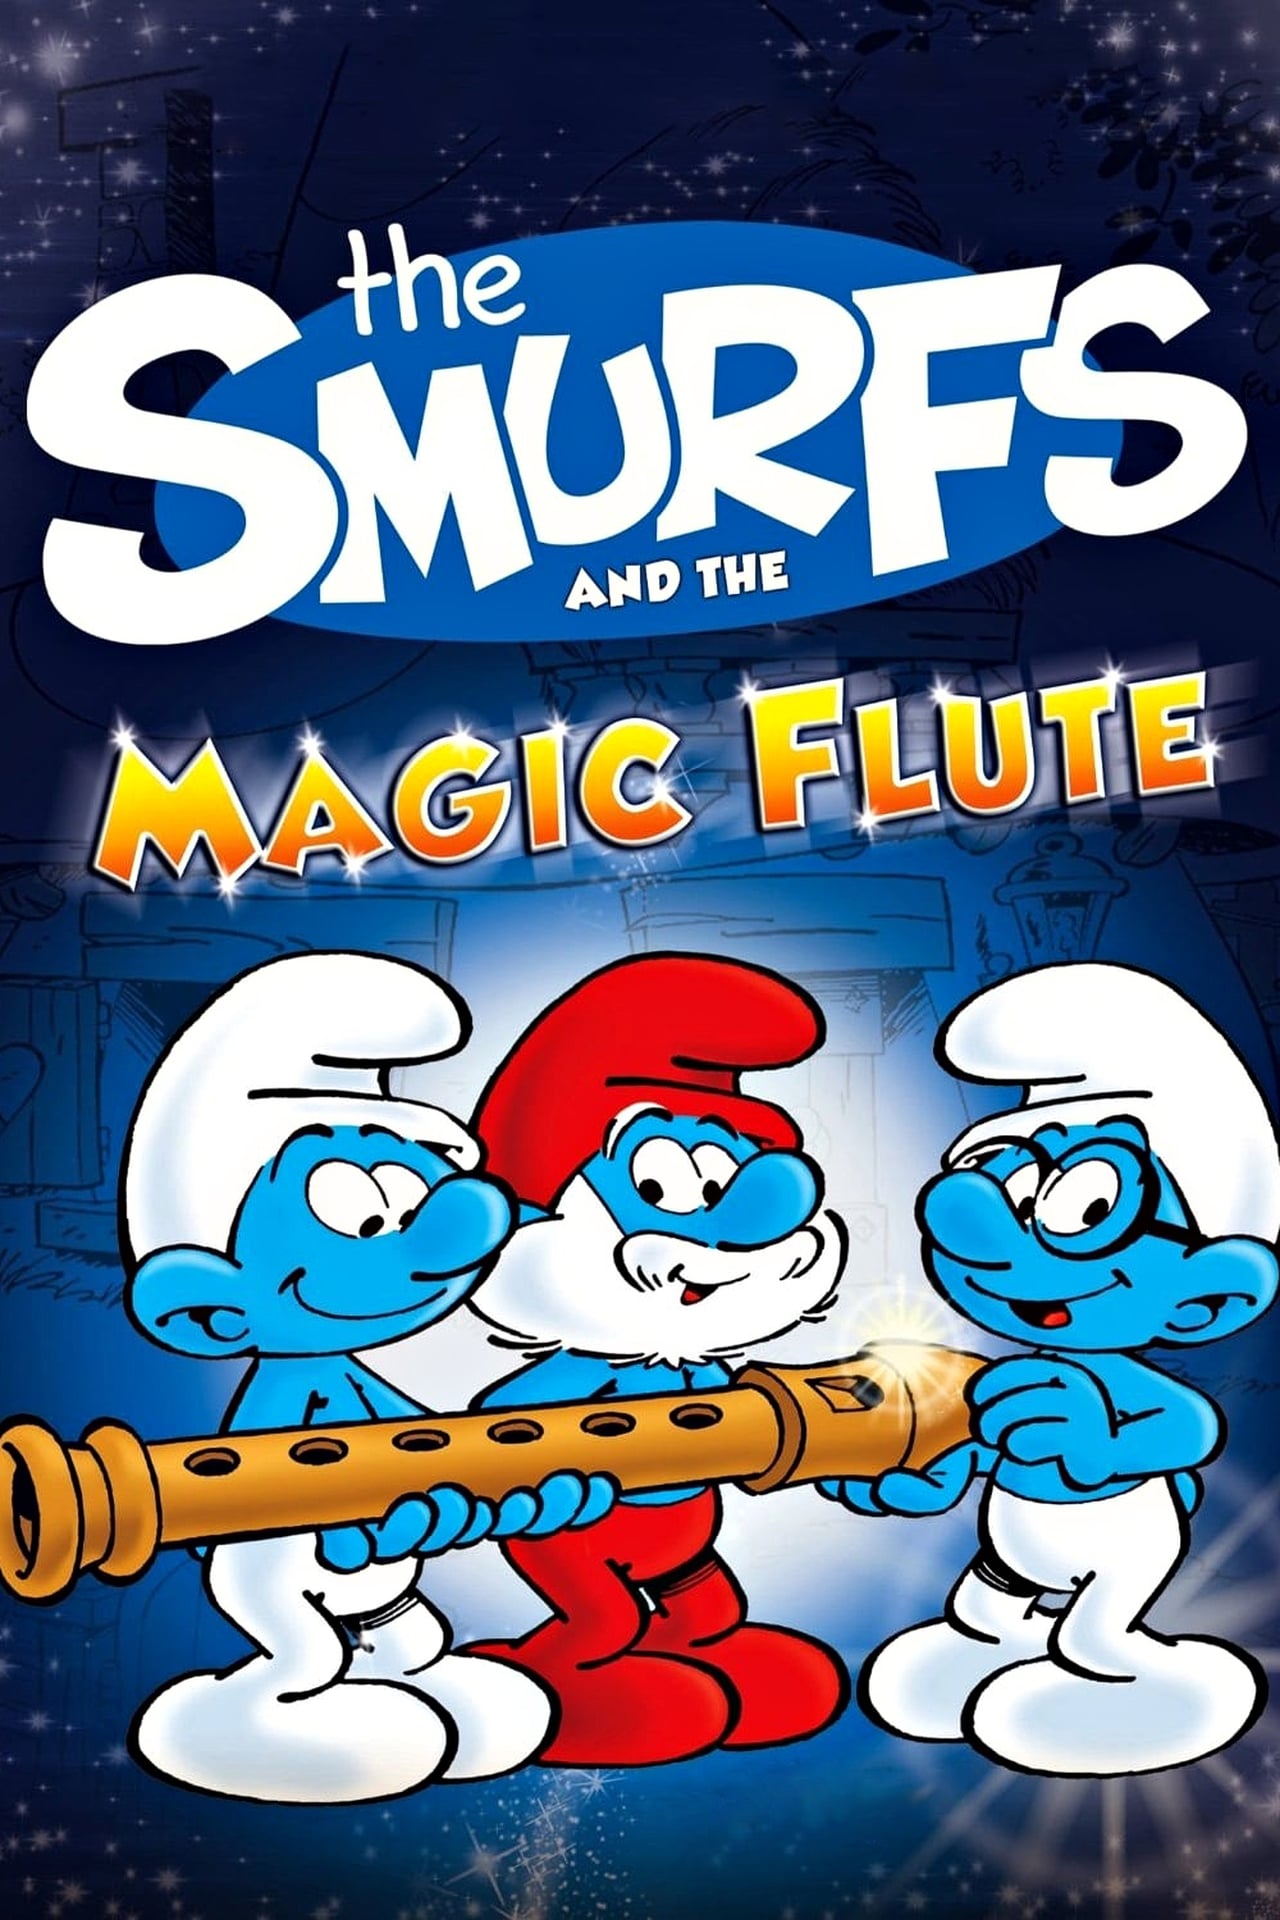 The Smurfs And The Magic Flute (1983)